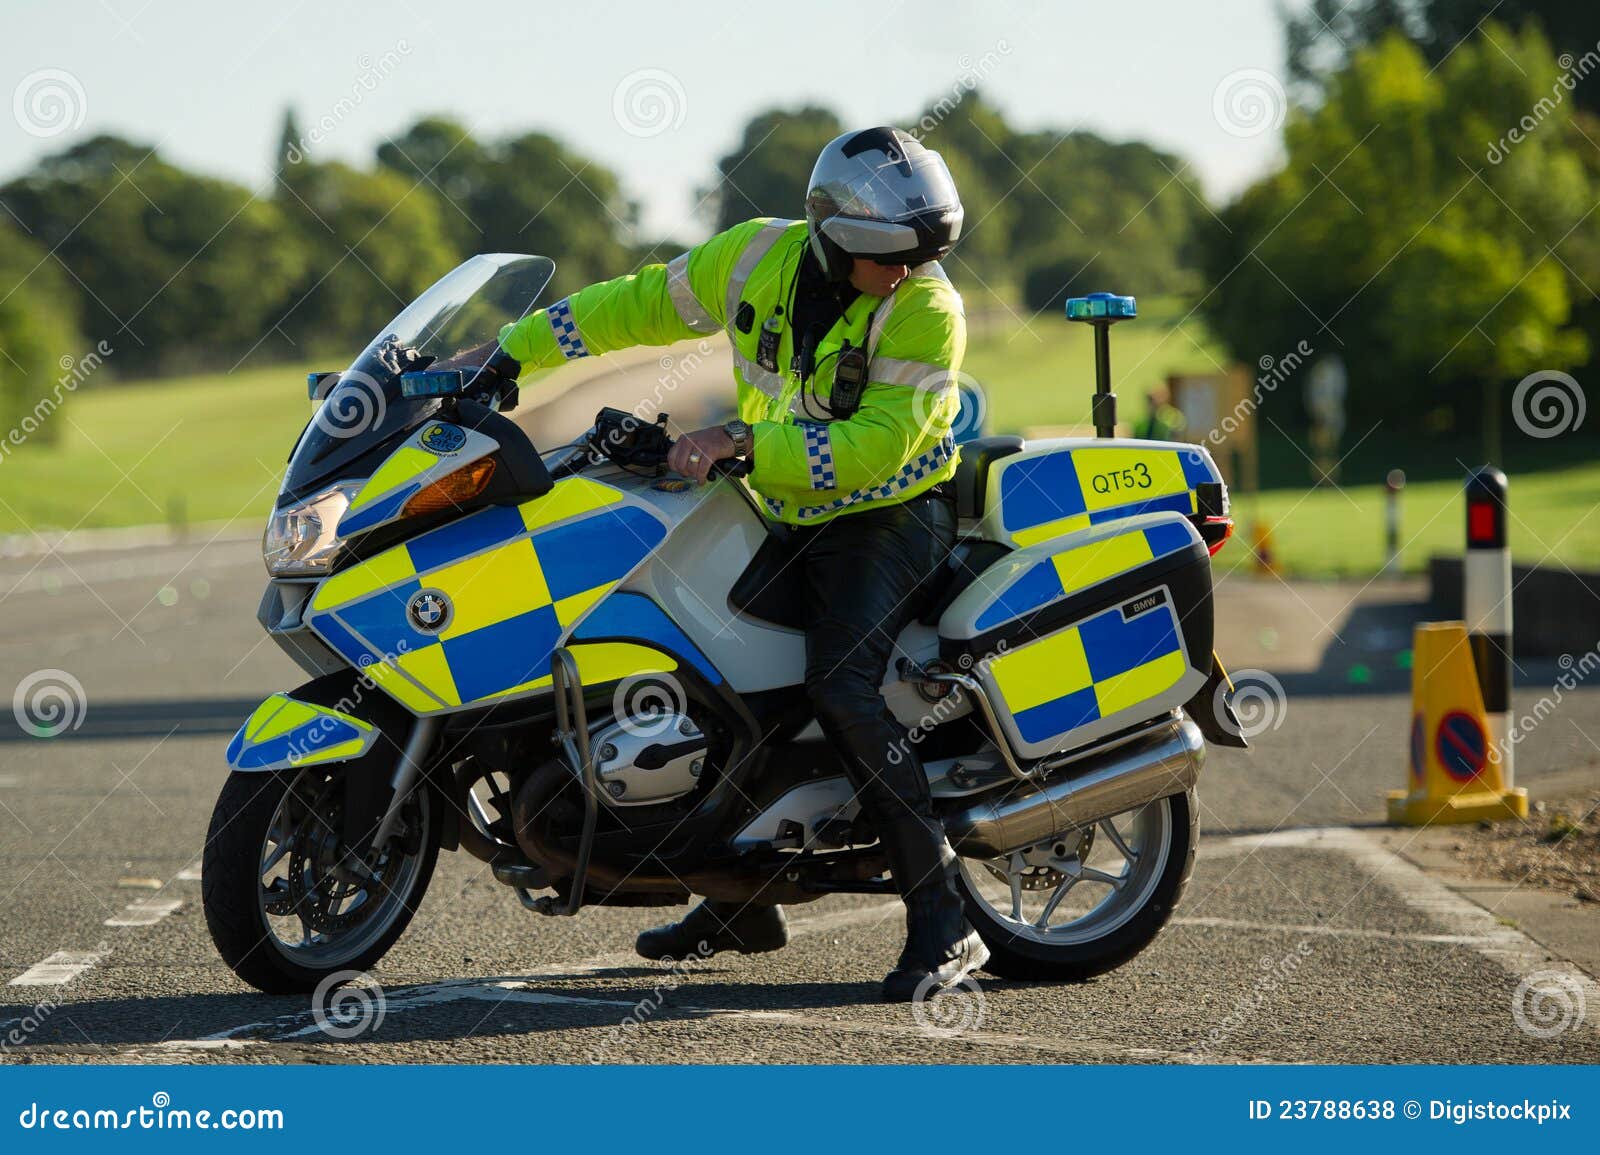 Police Motorcyclist,